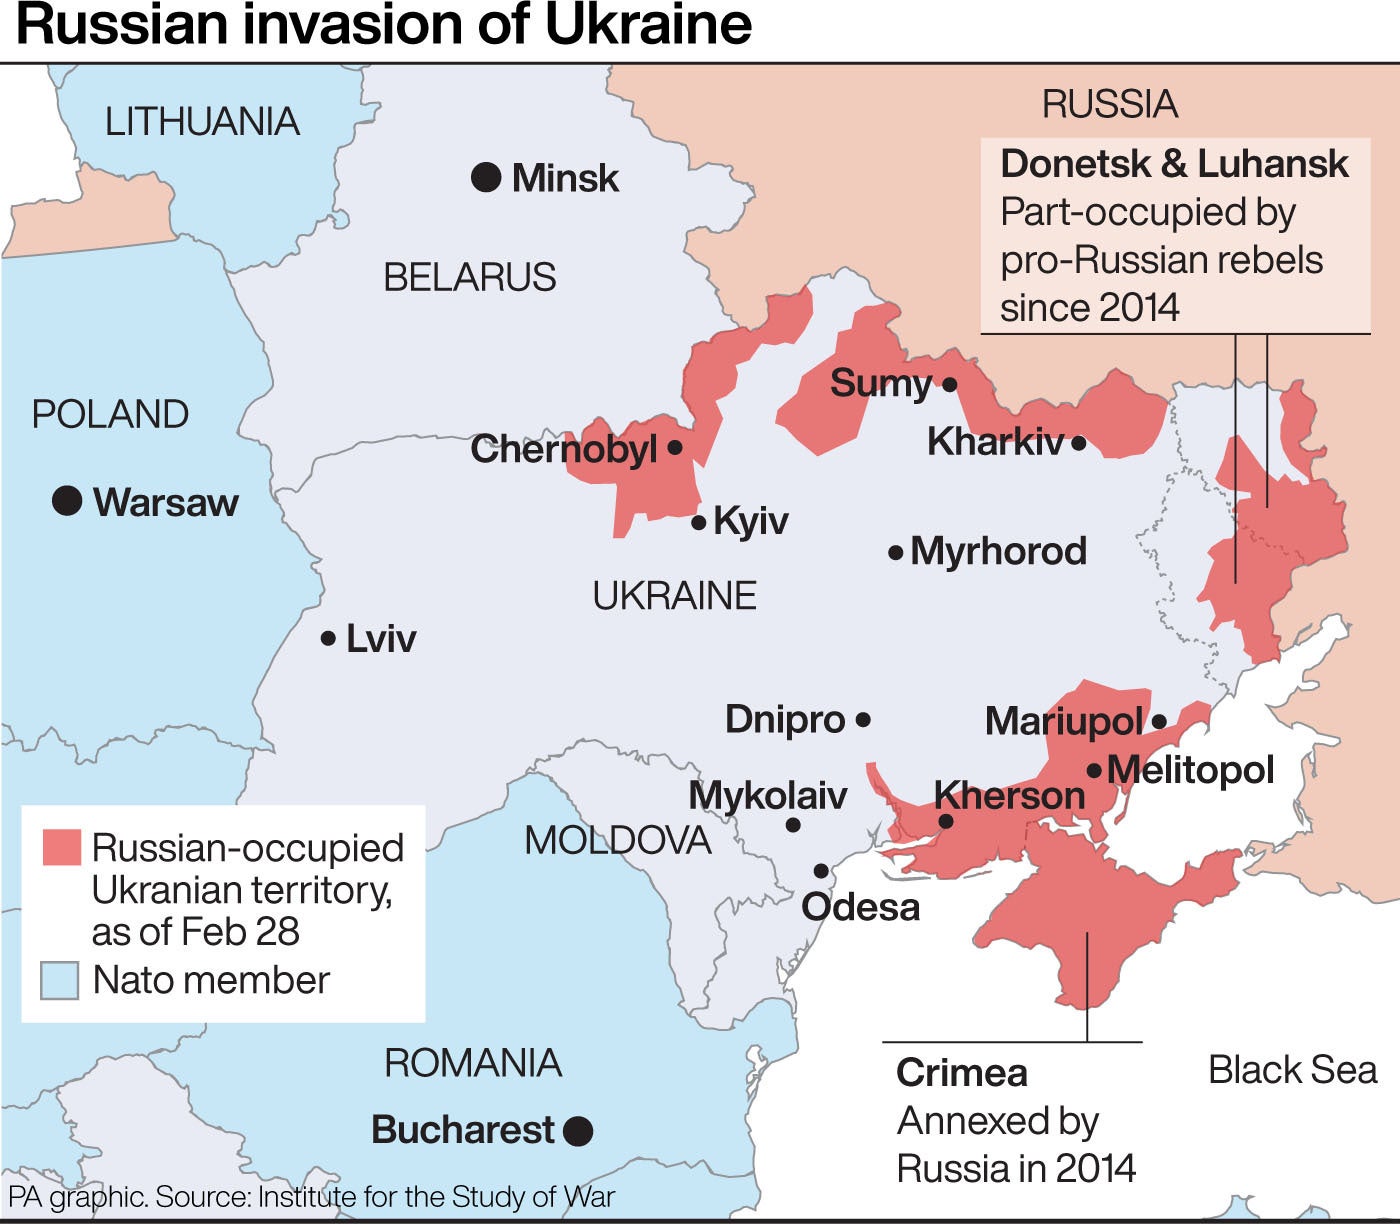 This map shows the extent of Russia’s current attack on Ukraine